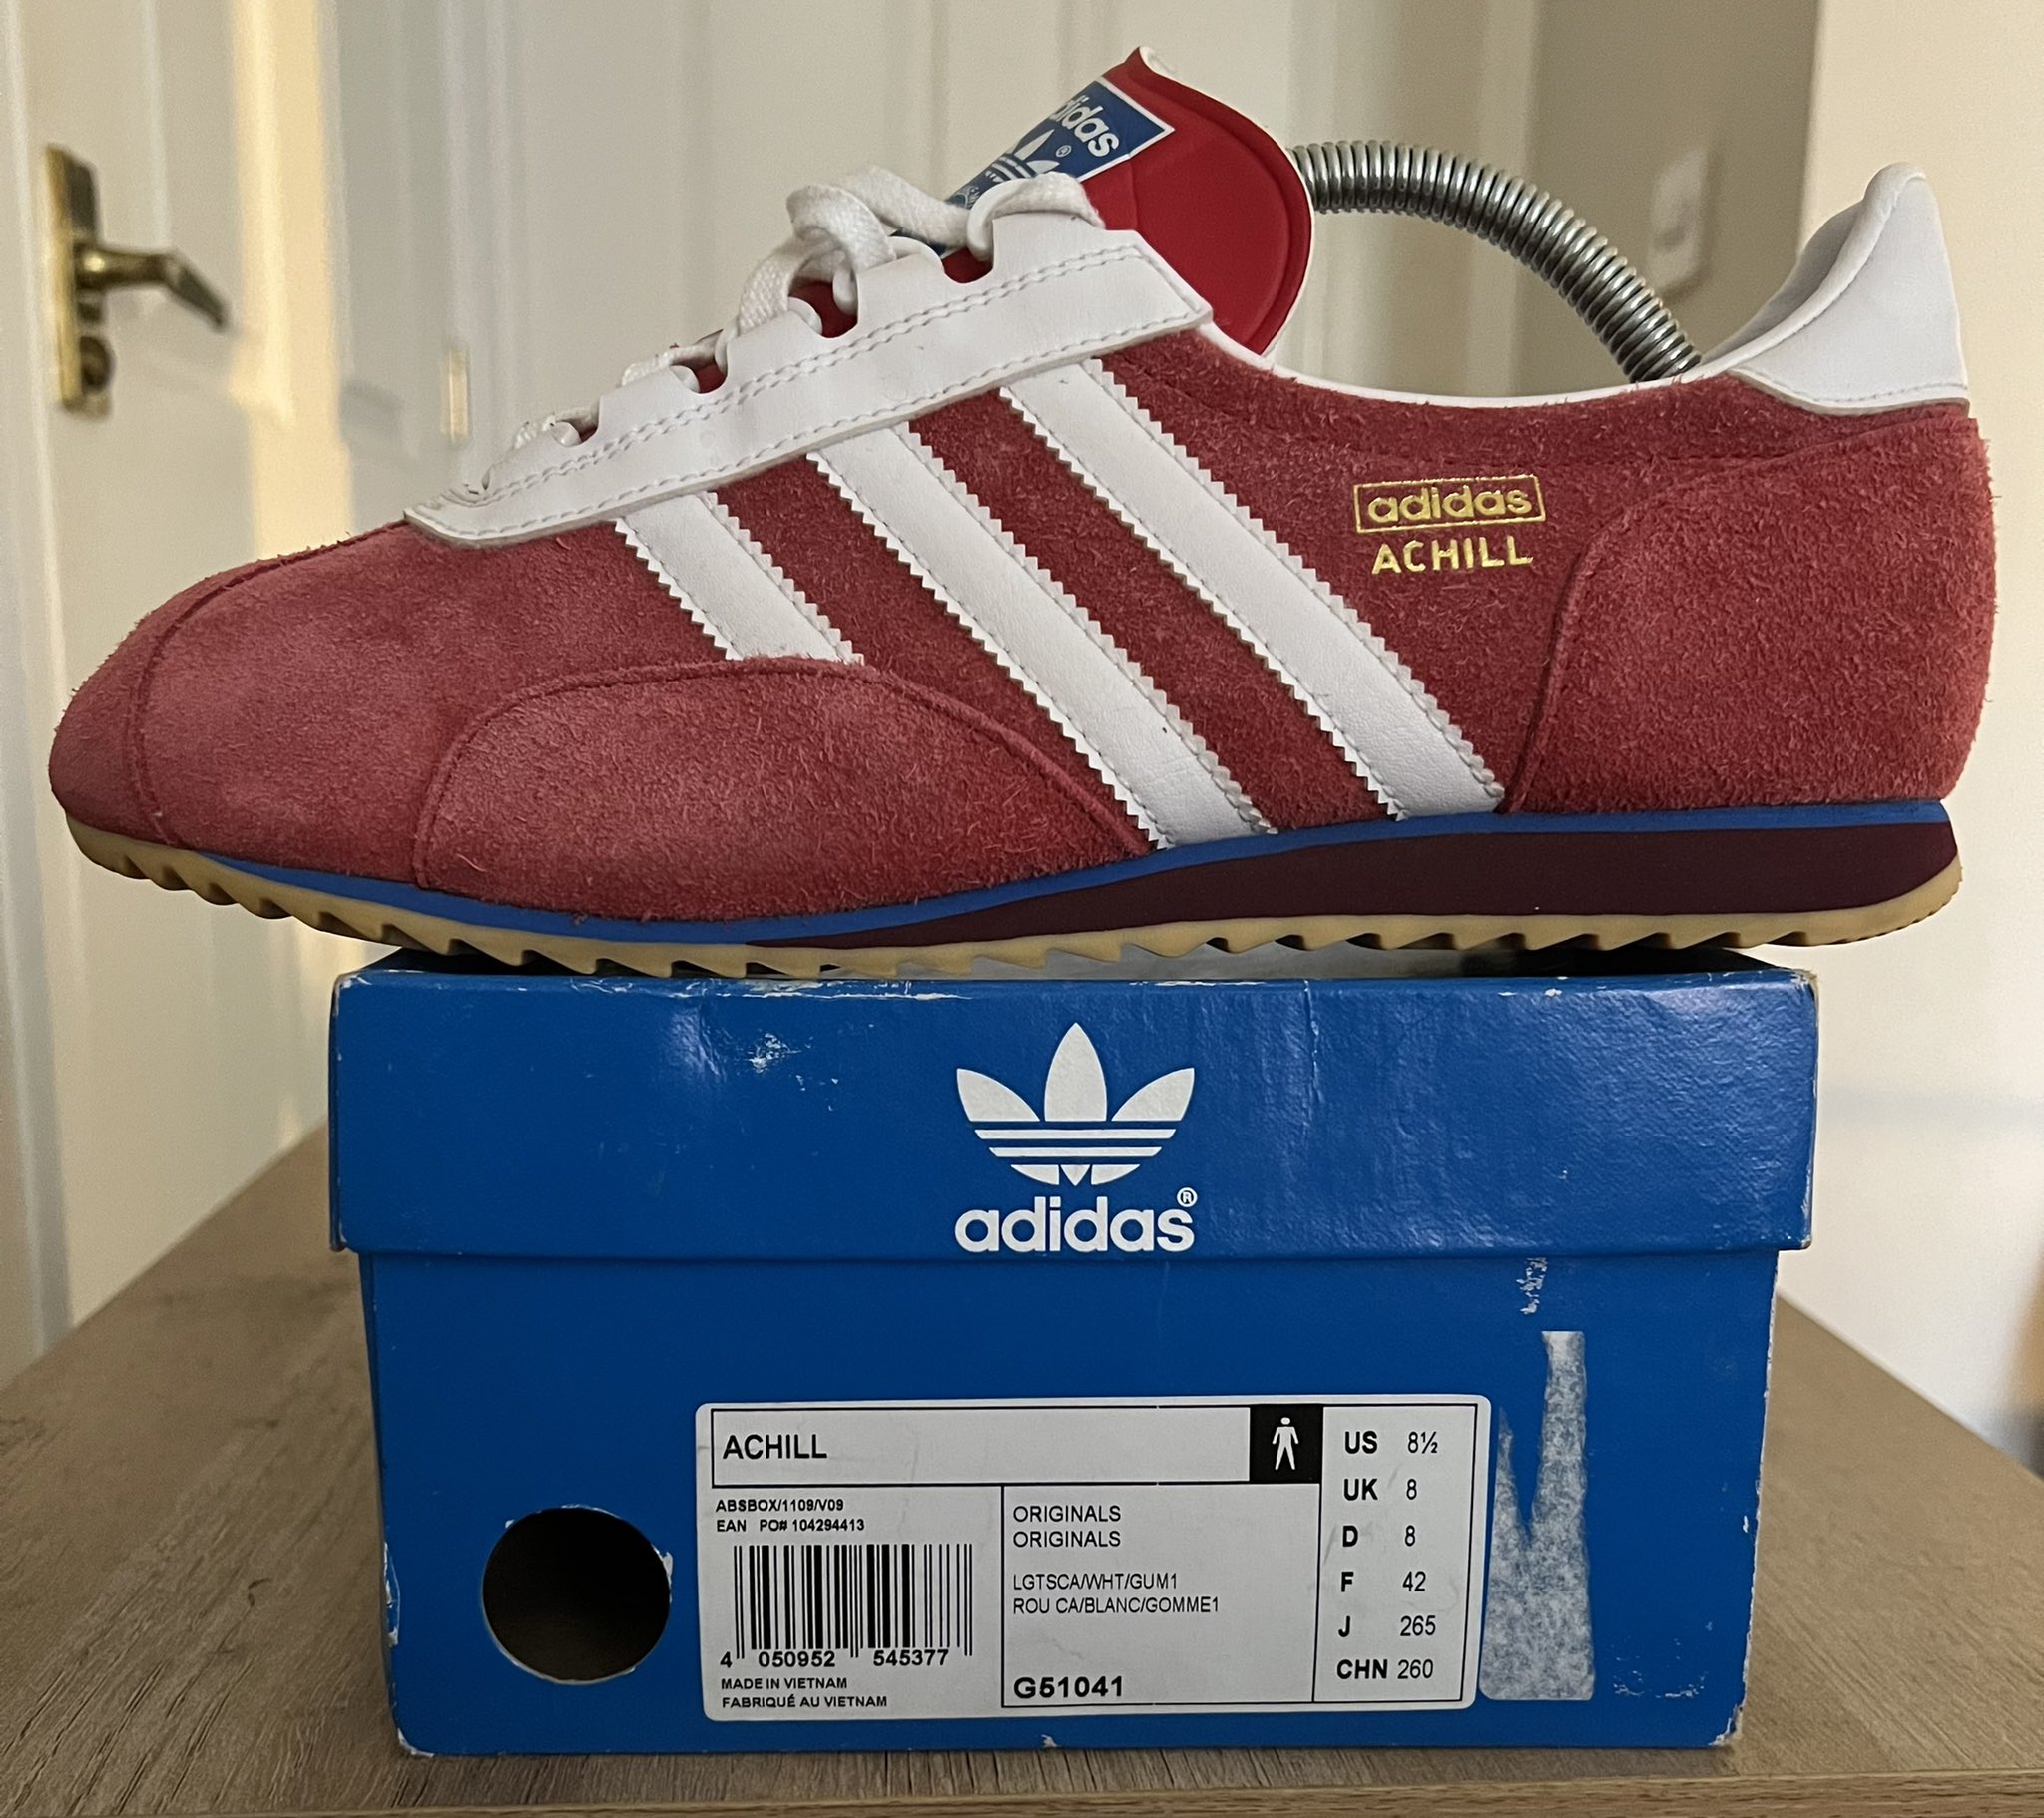 Desesperado habla período P_KOVS on Twitter: "🔥🔥🔥🔥FOR SALE🔥🔥🔥🔥 adidas Achill from 07/11 -  size 8 BNIB ( no tags unfortunately) Looking to get back what I paid £140  TYD - maybe open to very sensible